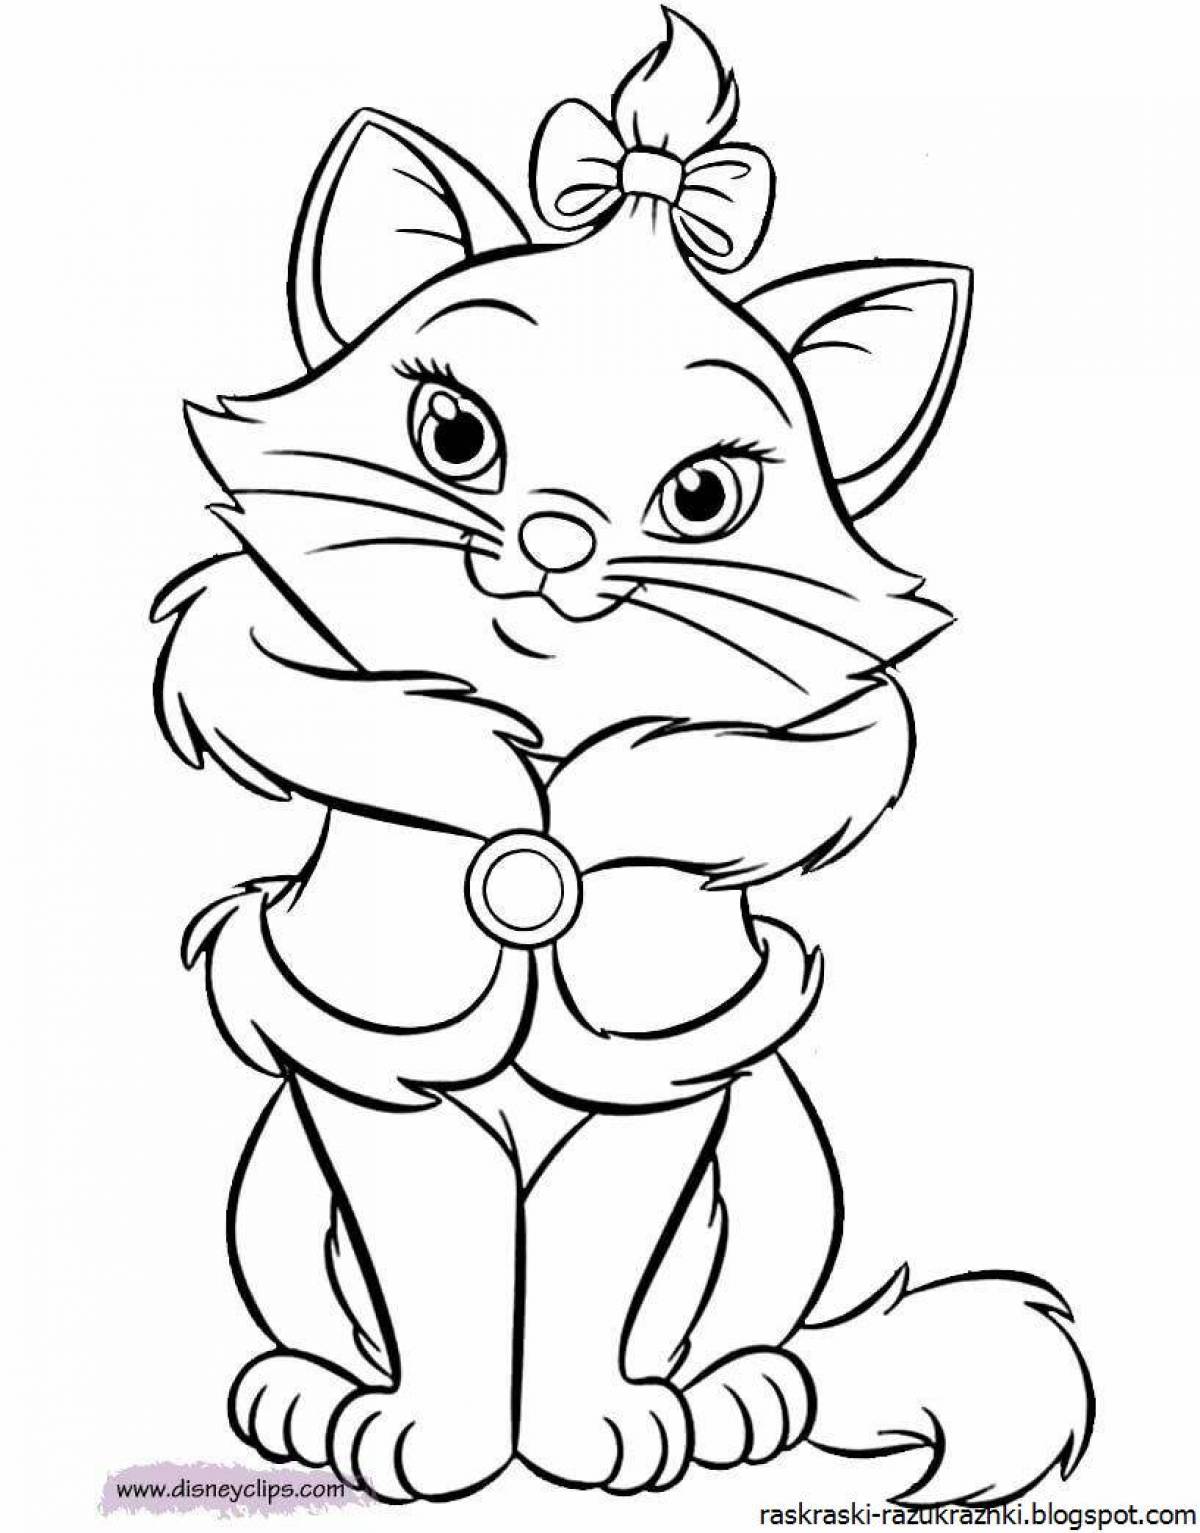 Playful coloring book for kitten girls